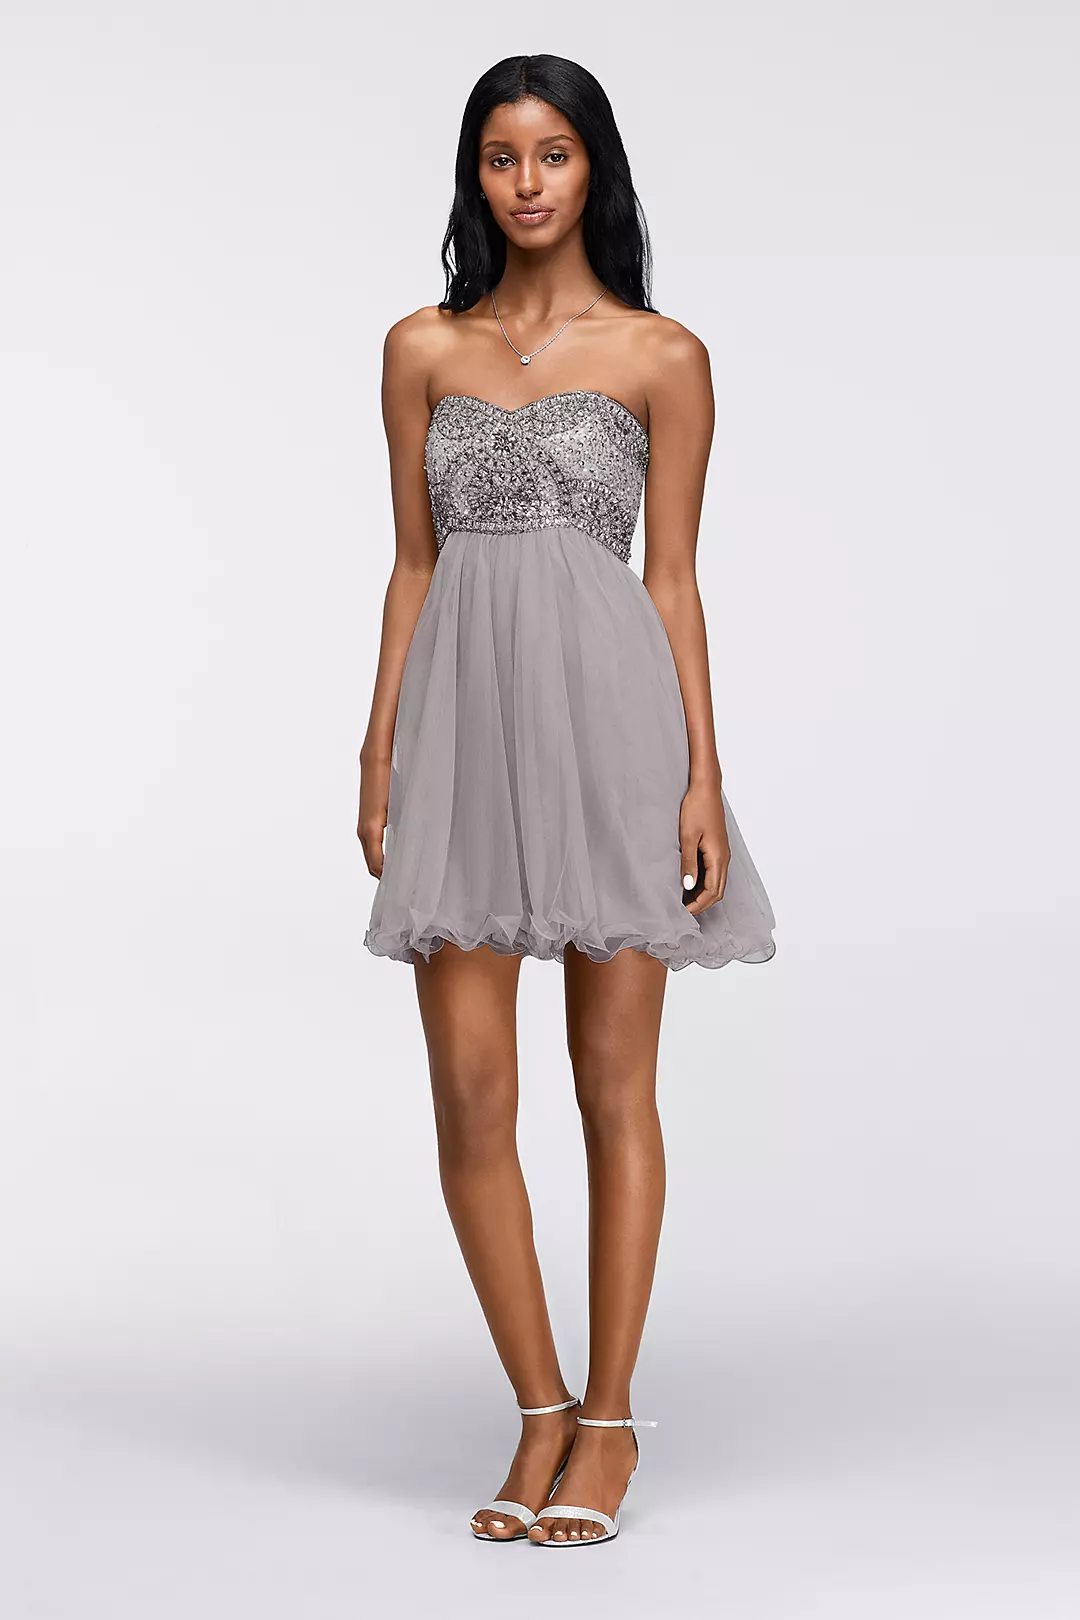 Short Homecoming Dress with Ornate Beaded Bodice Image